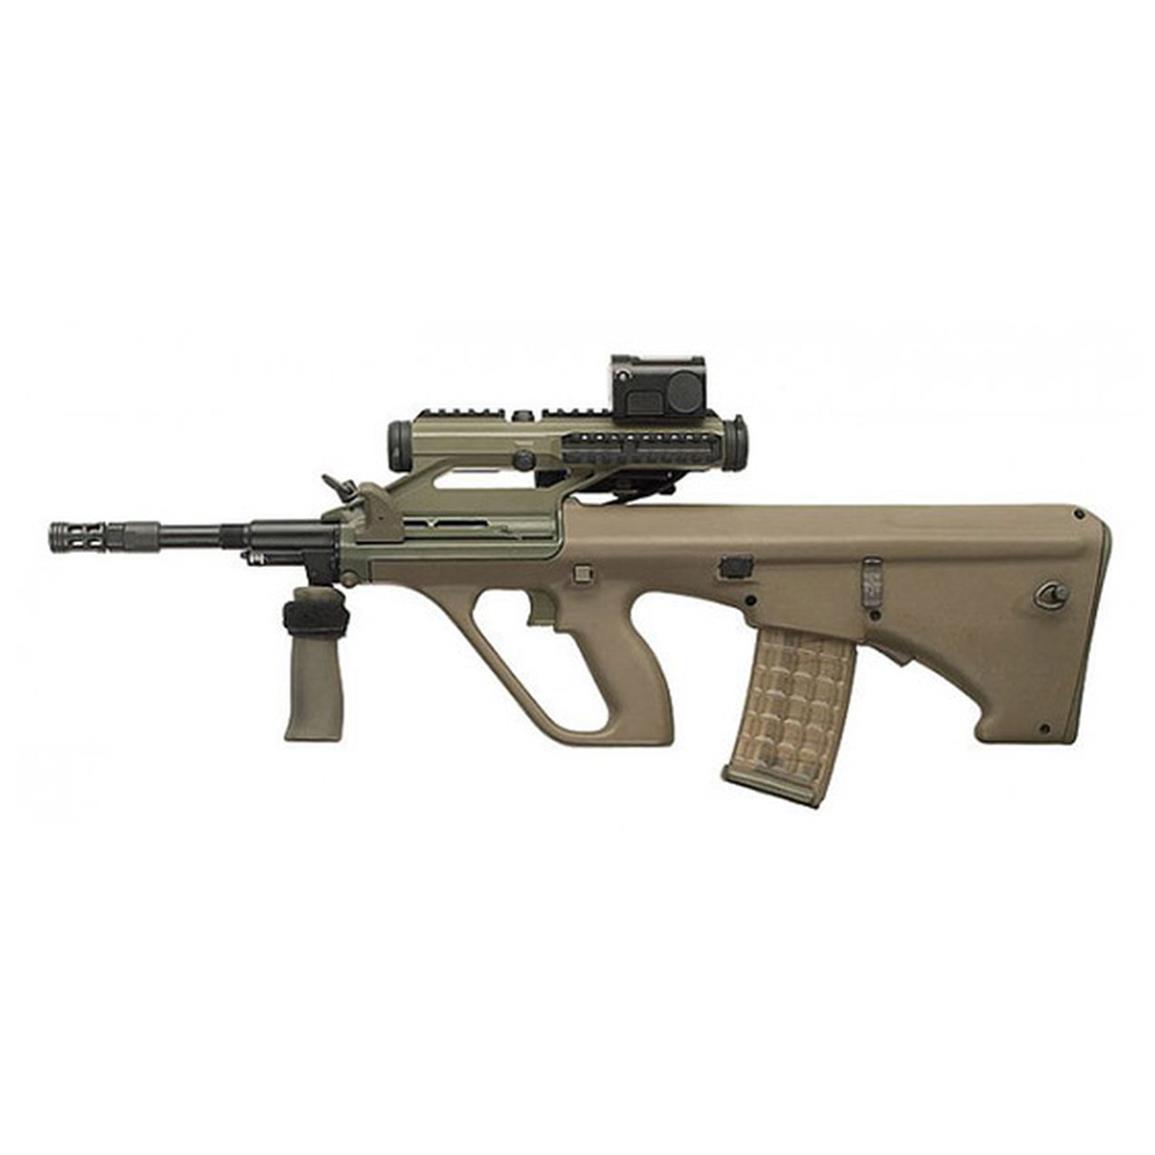 Steyr Arms AUG A3 M1, Semi-Automatic, 5.56 NATO, 16" Barrel, 1.5X Optic Sight, 30+1 Rounds